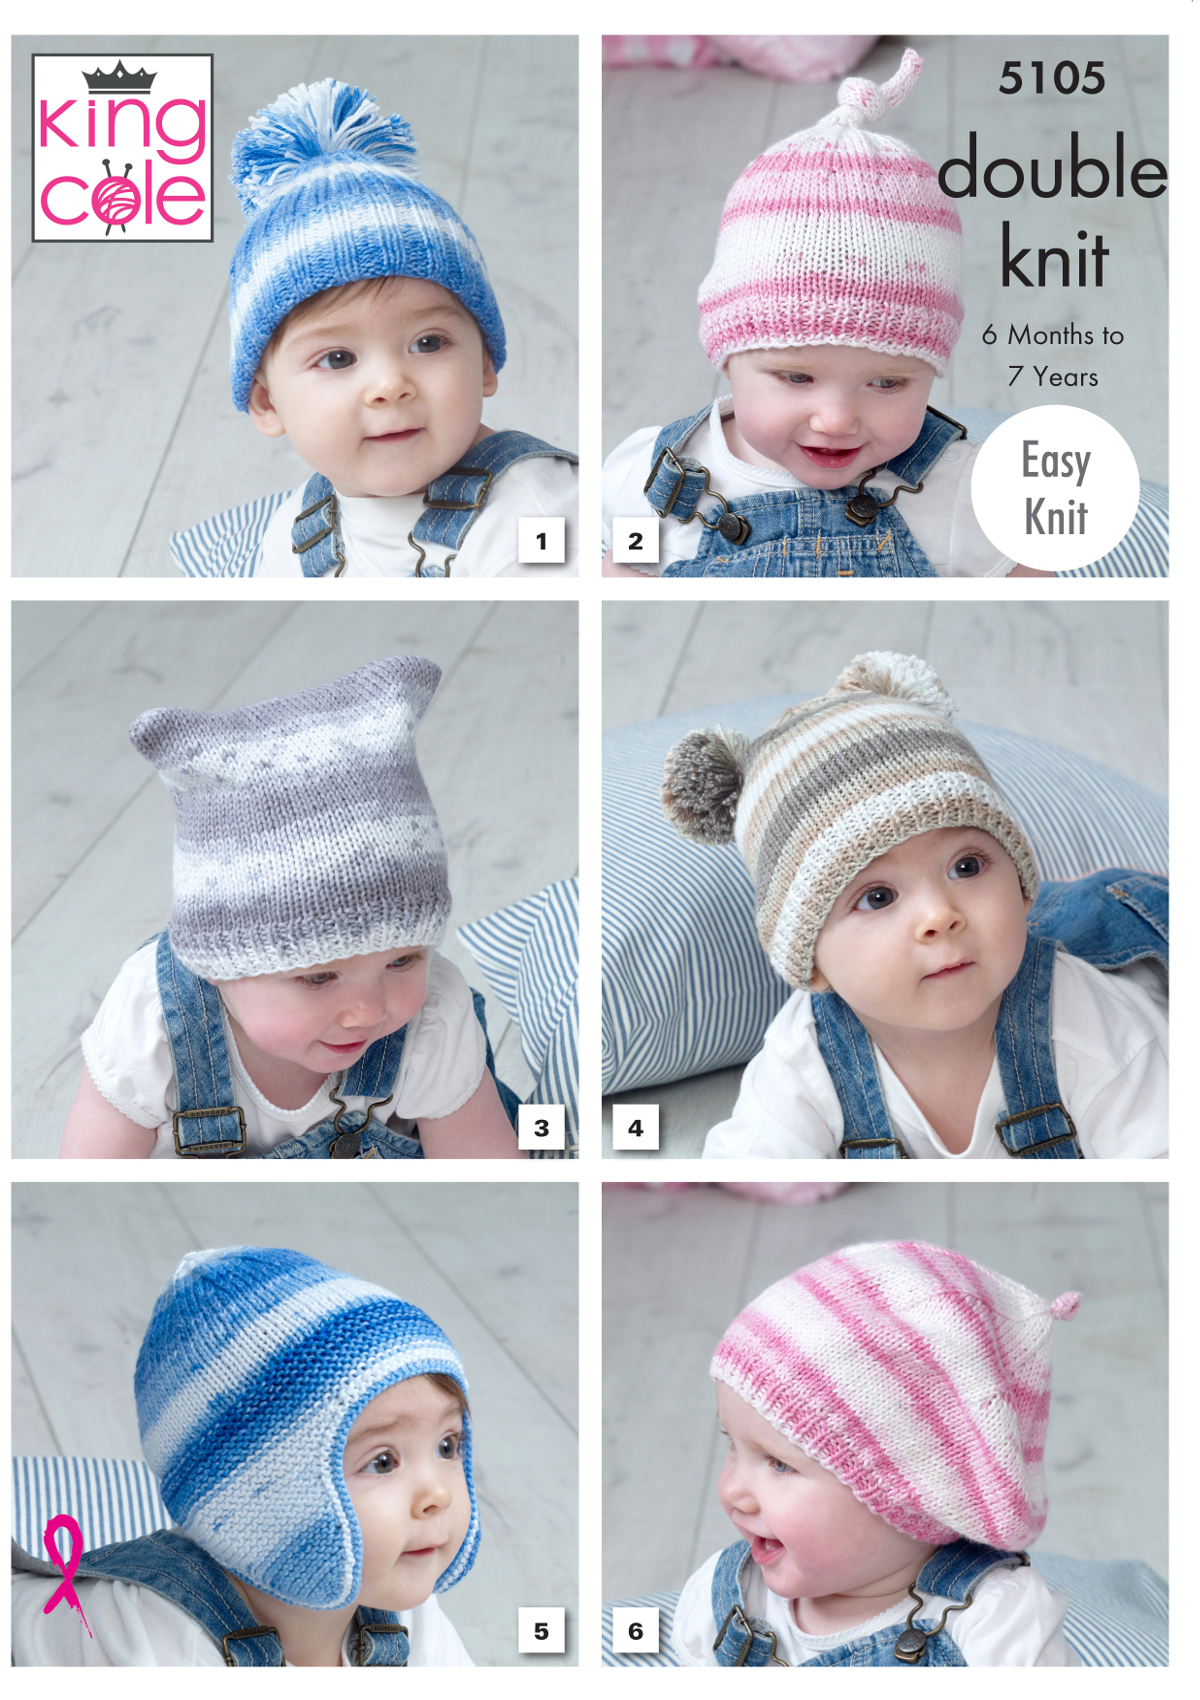 Beret Knitting Pattern Easy Details About Ba Double Knitting Pattern Easy Knit Hats Helmet Beret King Cole 5105